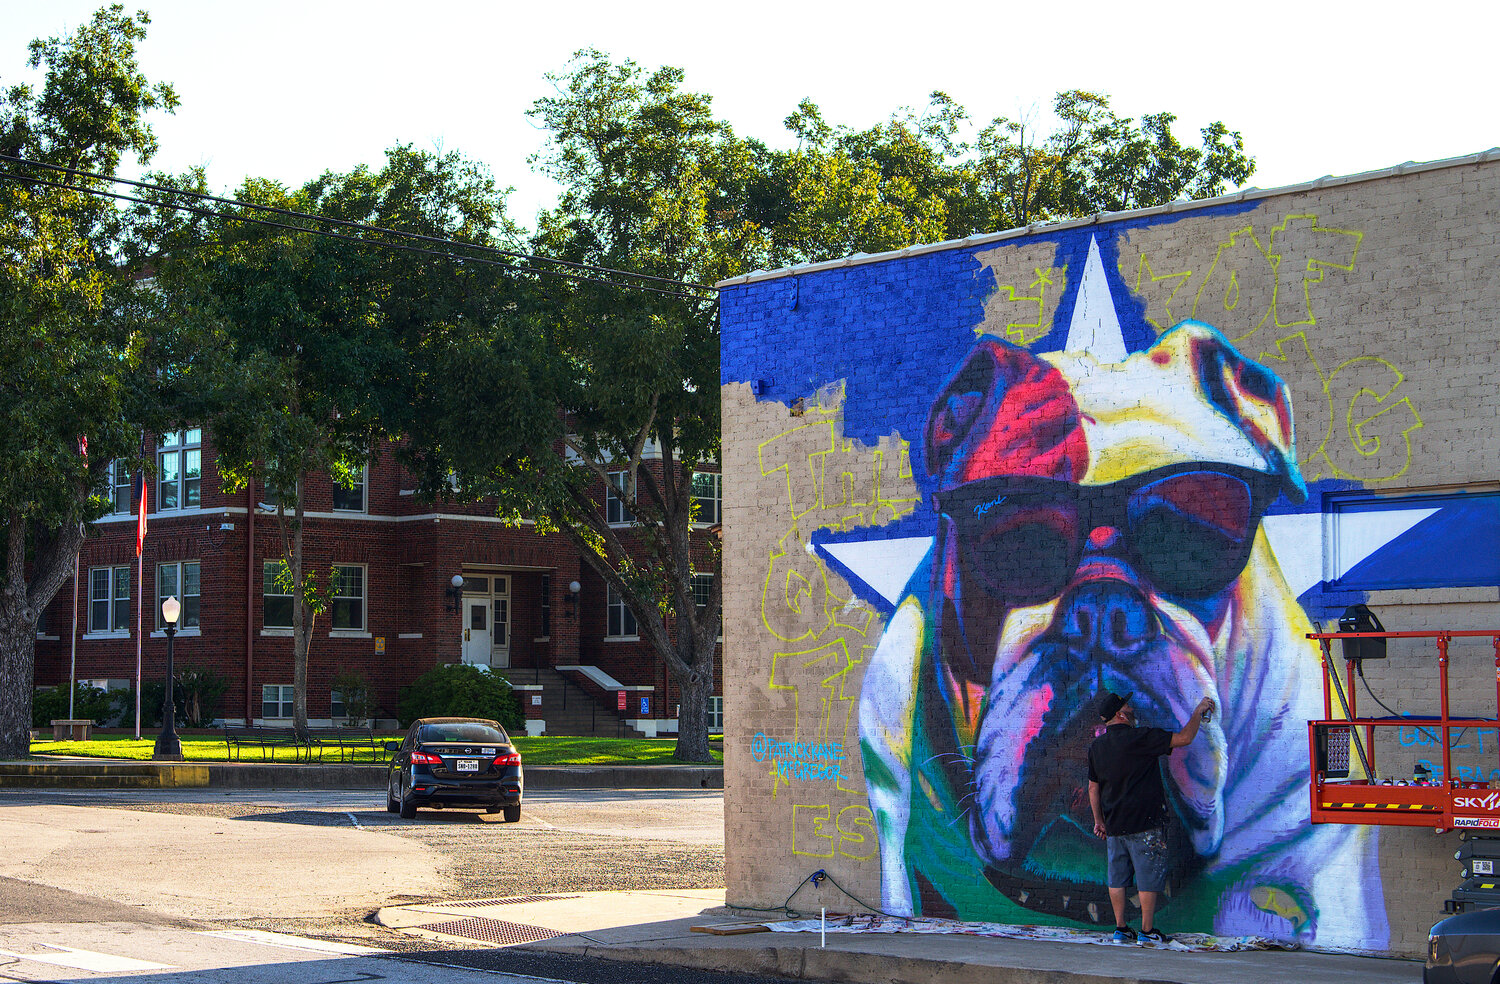 Patrick McGregor makes his bulldog begin to come to life Monday evening on the eastern wall of Dani's Sidekick, across the square from the Wood County Courthouse (background, left). [peruse the progress]